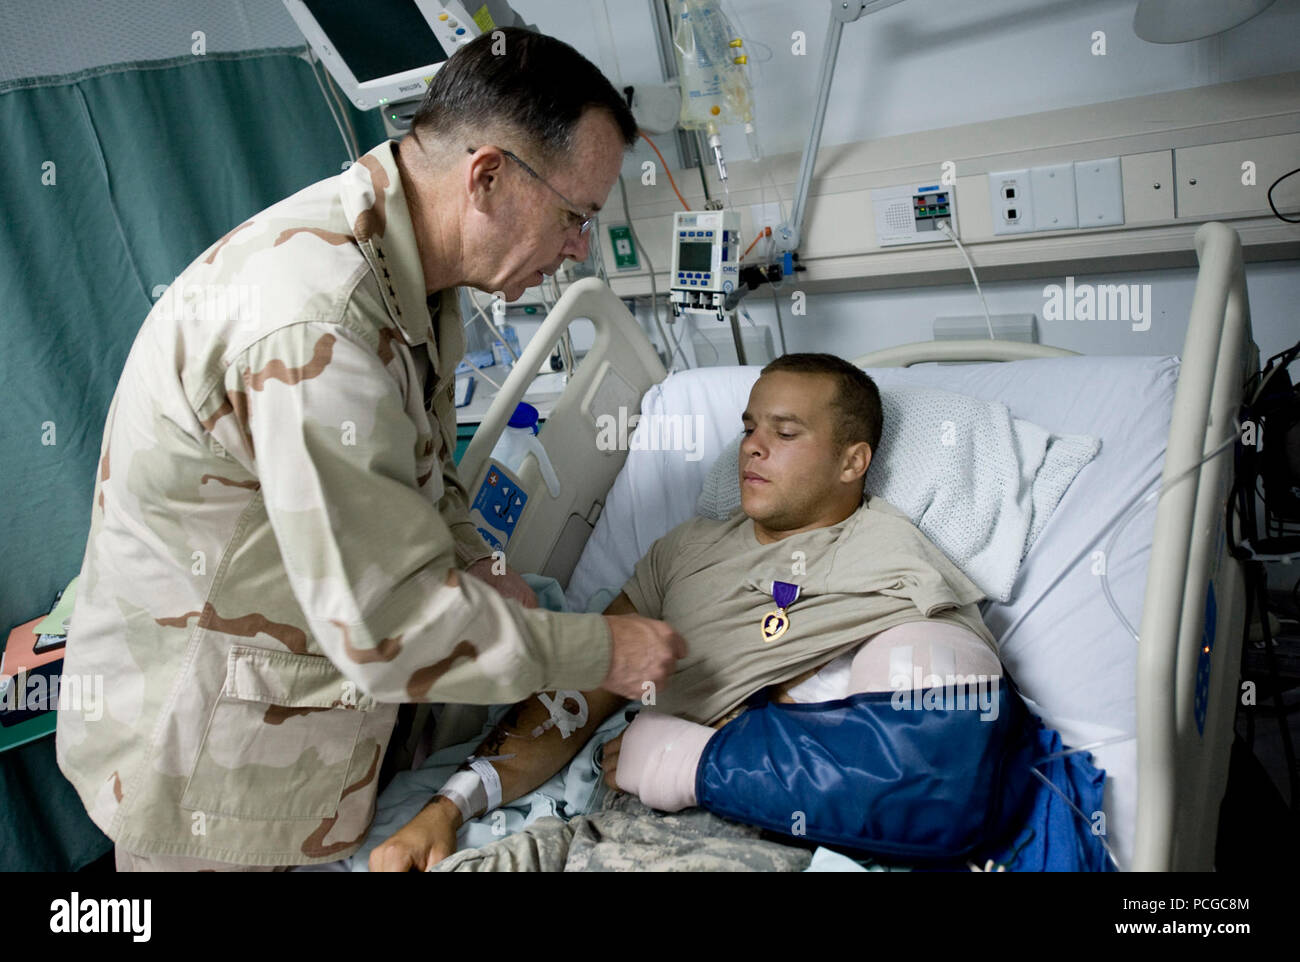 Chairman of the Joint Chiefs of Staff Navy Adm. Mike Mullen presents a Purple Heart medal to Army Sgt. Marcus Love at Bagram Air Field, Afghanistan, July 14, 2009. Love, from Delta Company, 1st Battalion, 87th Infantry Regiment, 3rd Brigade Combat Team, 10th Mountain Division out of Fort Drum, N.Y., was presented the medal for a gunshot wound received earlier in the day. ( Stock Photo